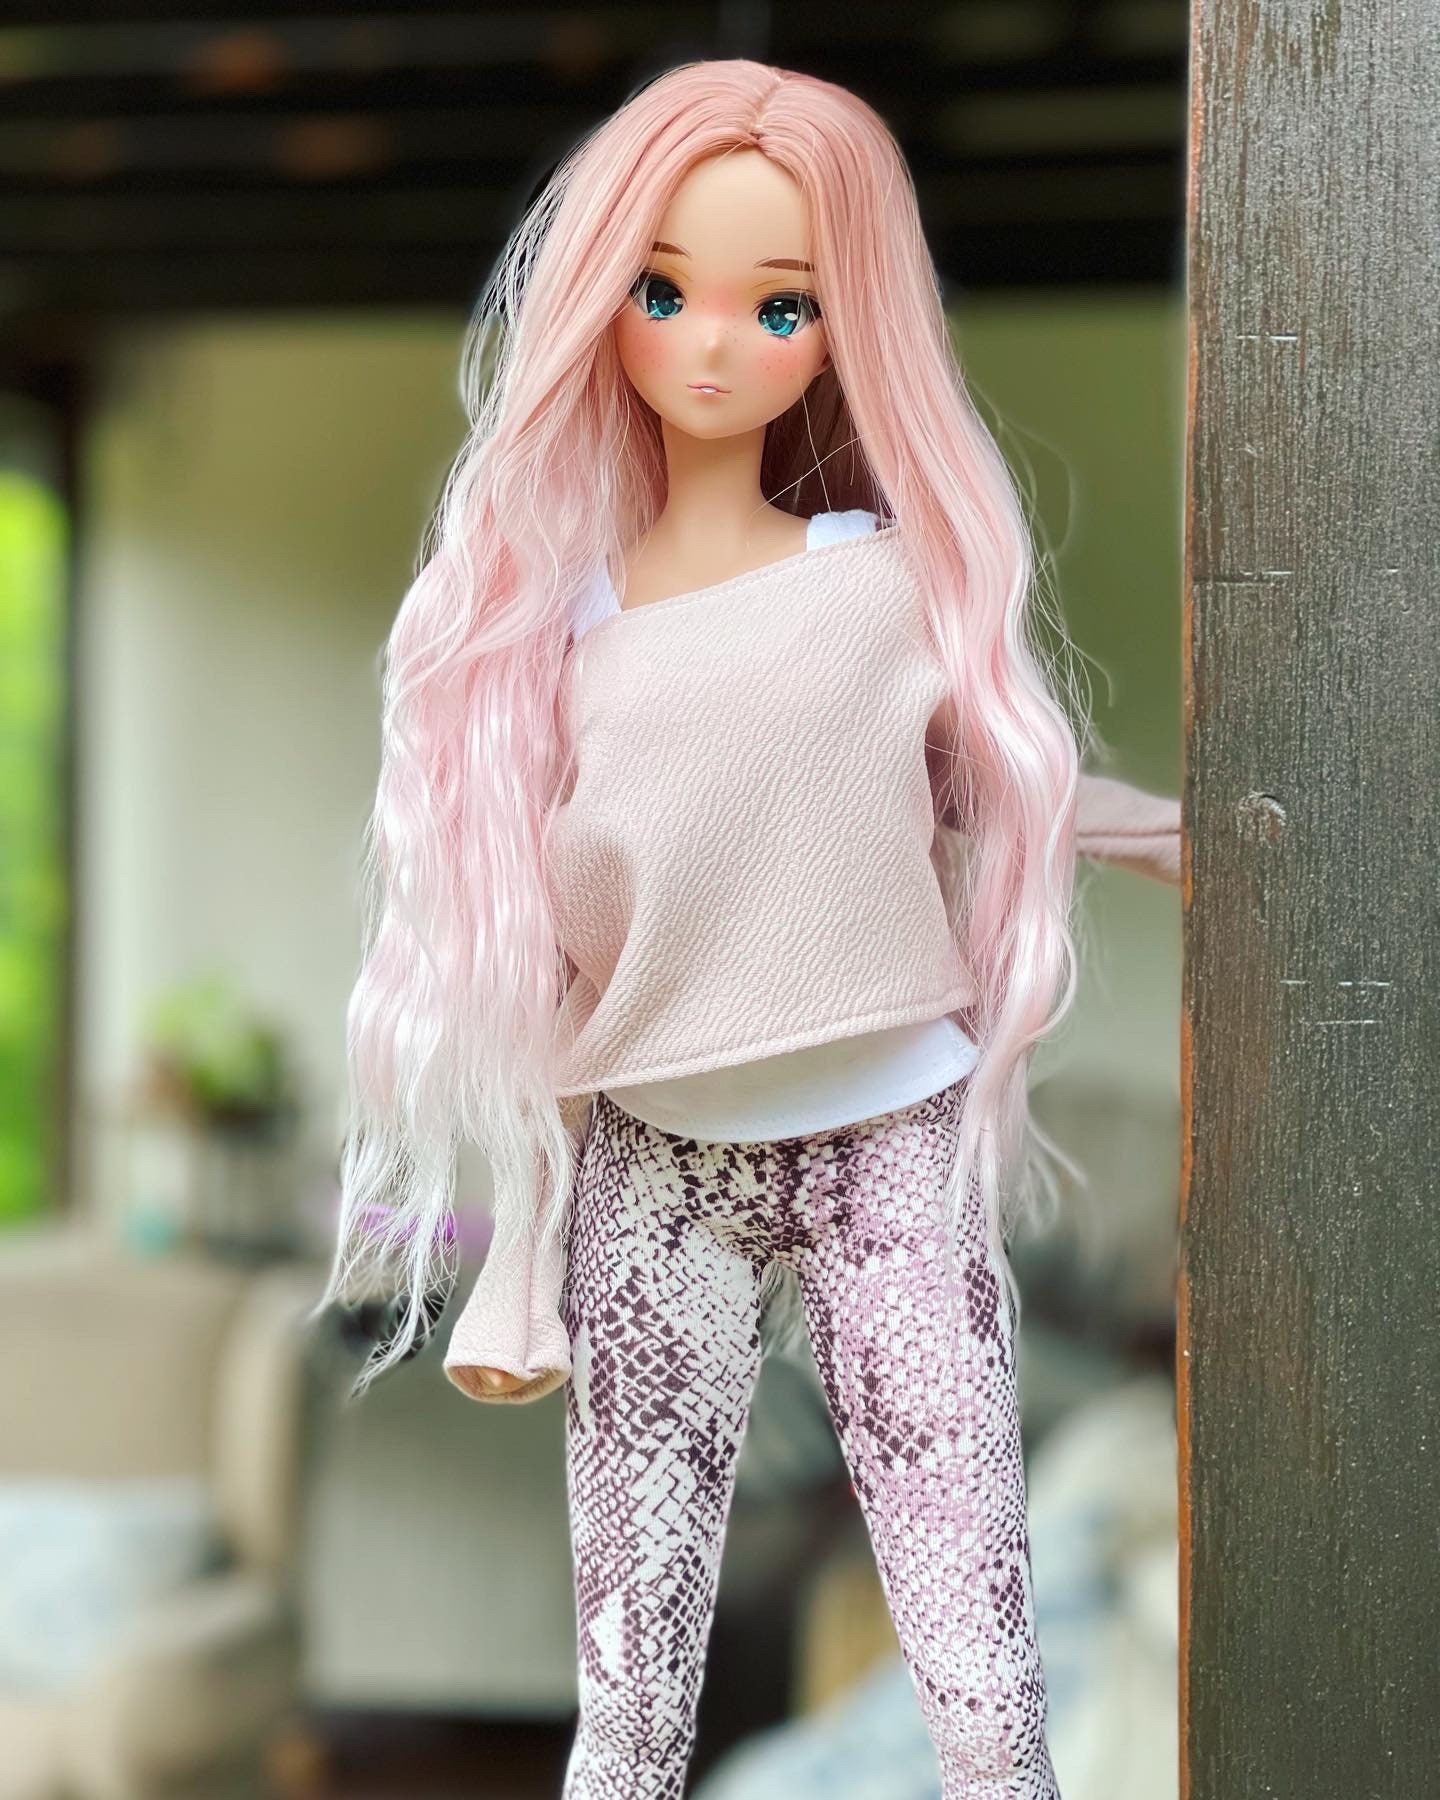 Custom doll Wig for Smart Dolls- Heat Safe - Tangle Resistant- 8.5" head size of Bjd, SD, Dollfie Dream dolls  pink ombre